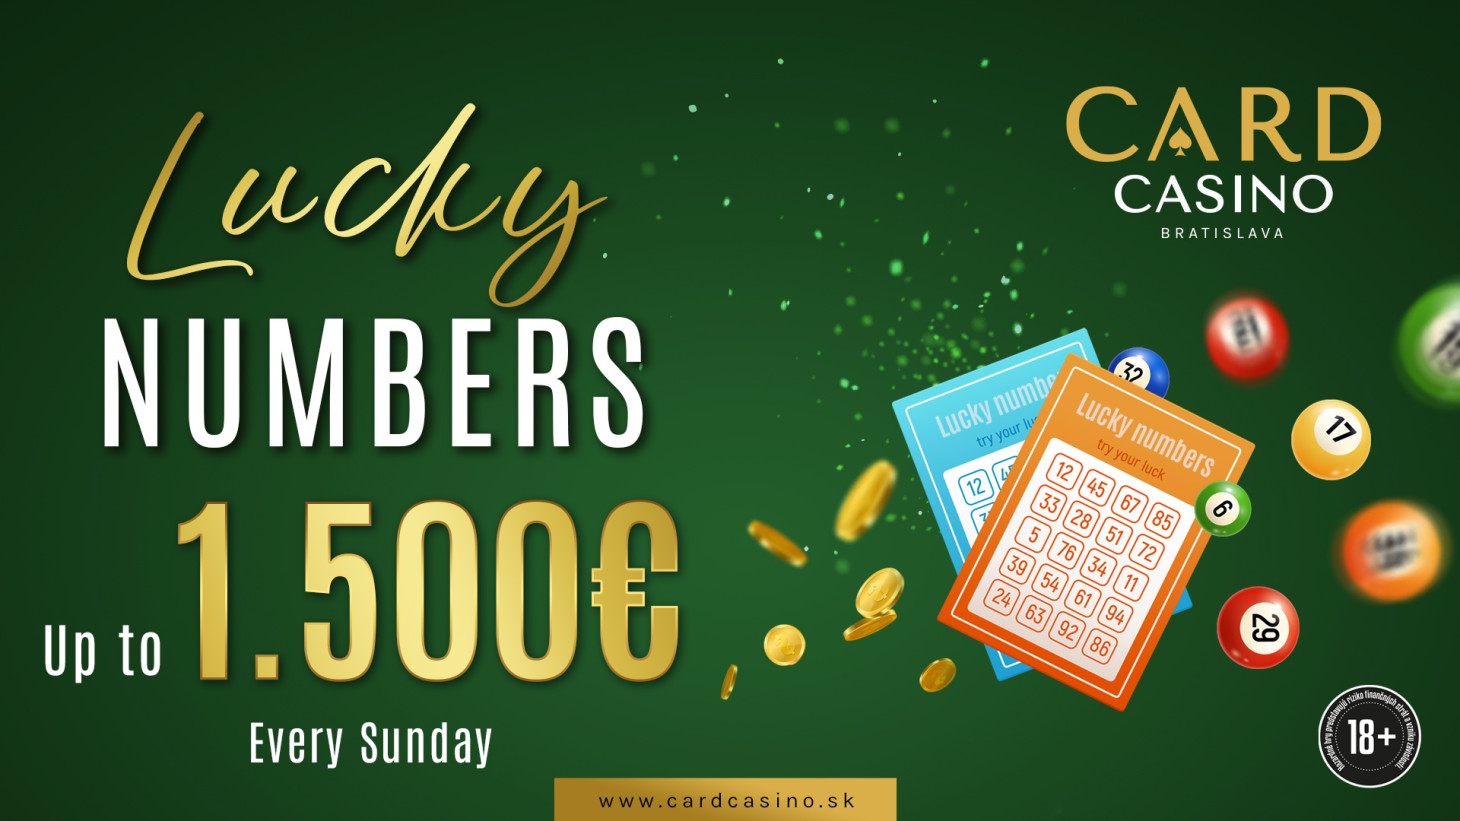 Sundays belong to Lucky numbers! Playing for awesome prizes